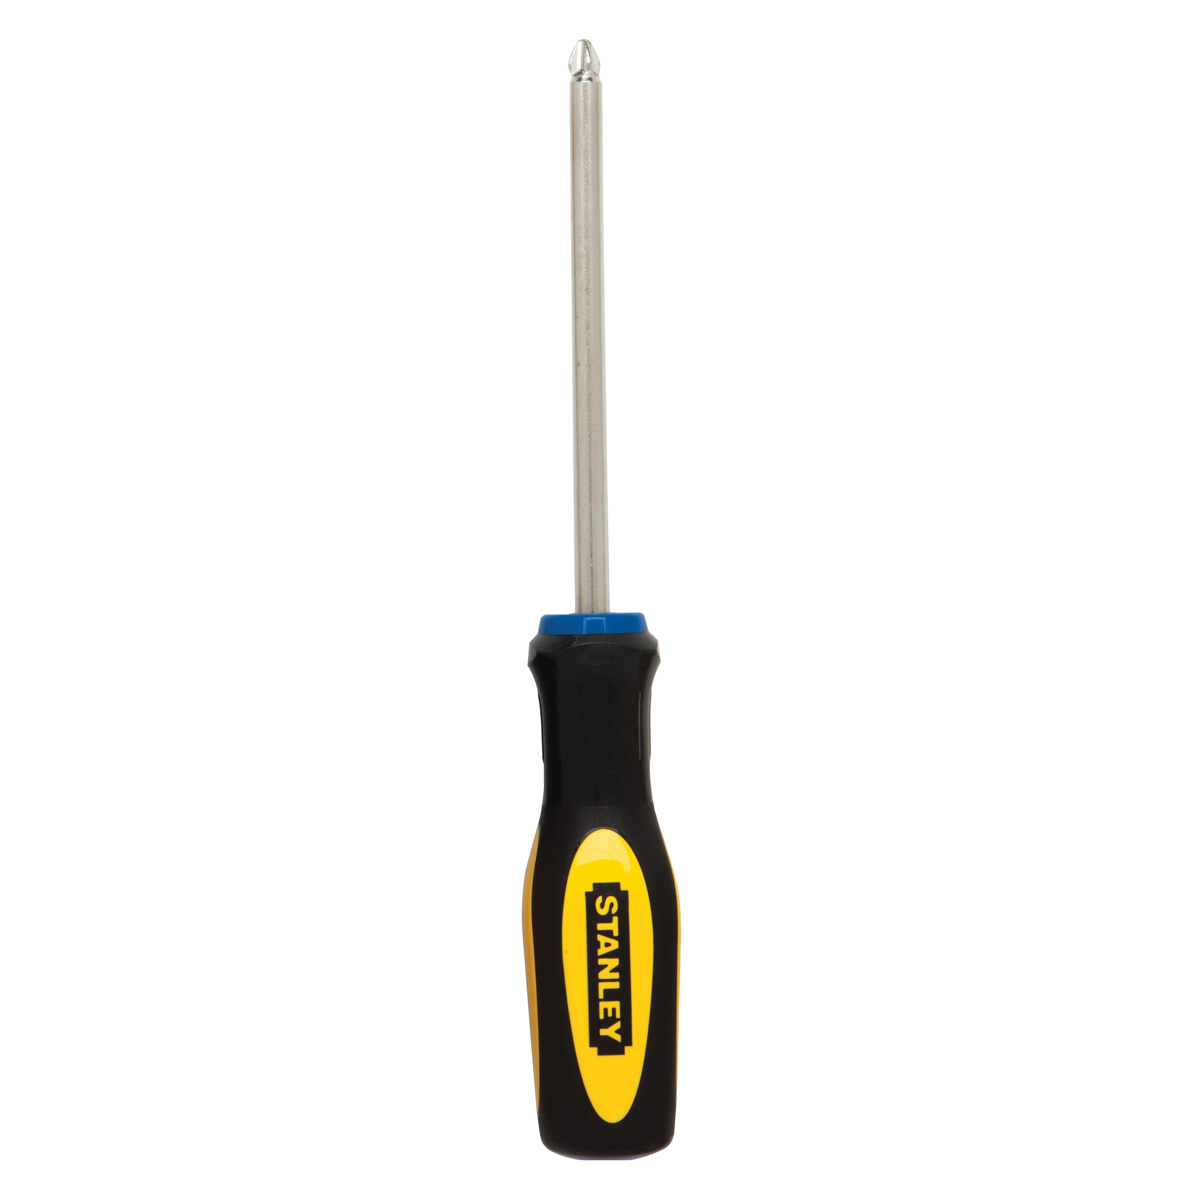 Stanley 60-002 Screwdriver, 1/4 in Drive, Phillips, Slotted Drive, 8 in OAL, 4 in L Shank, Ergonomic Handle